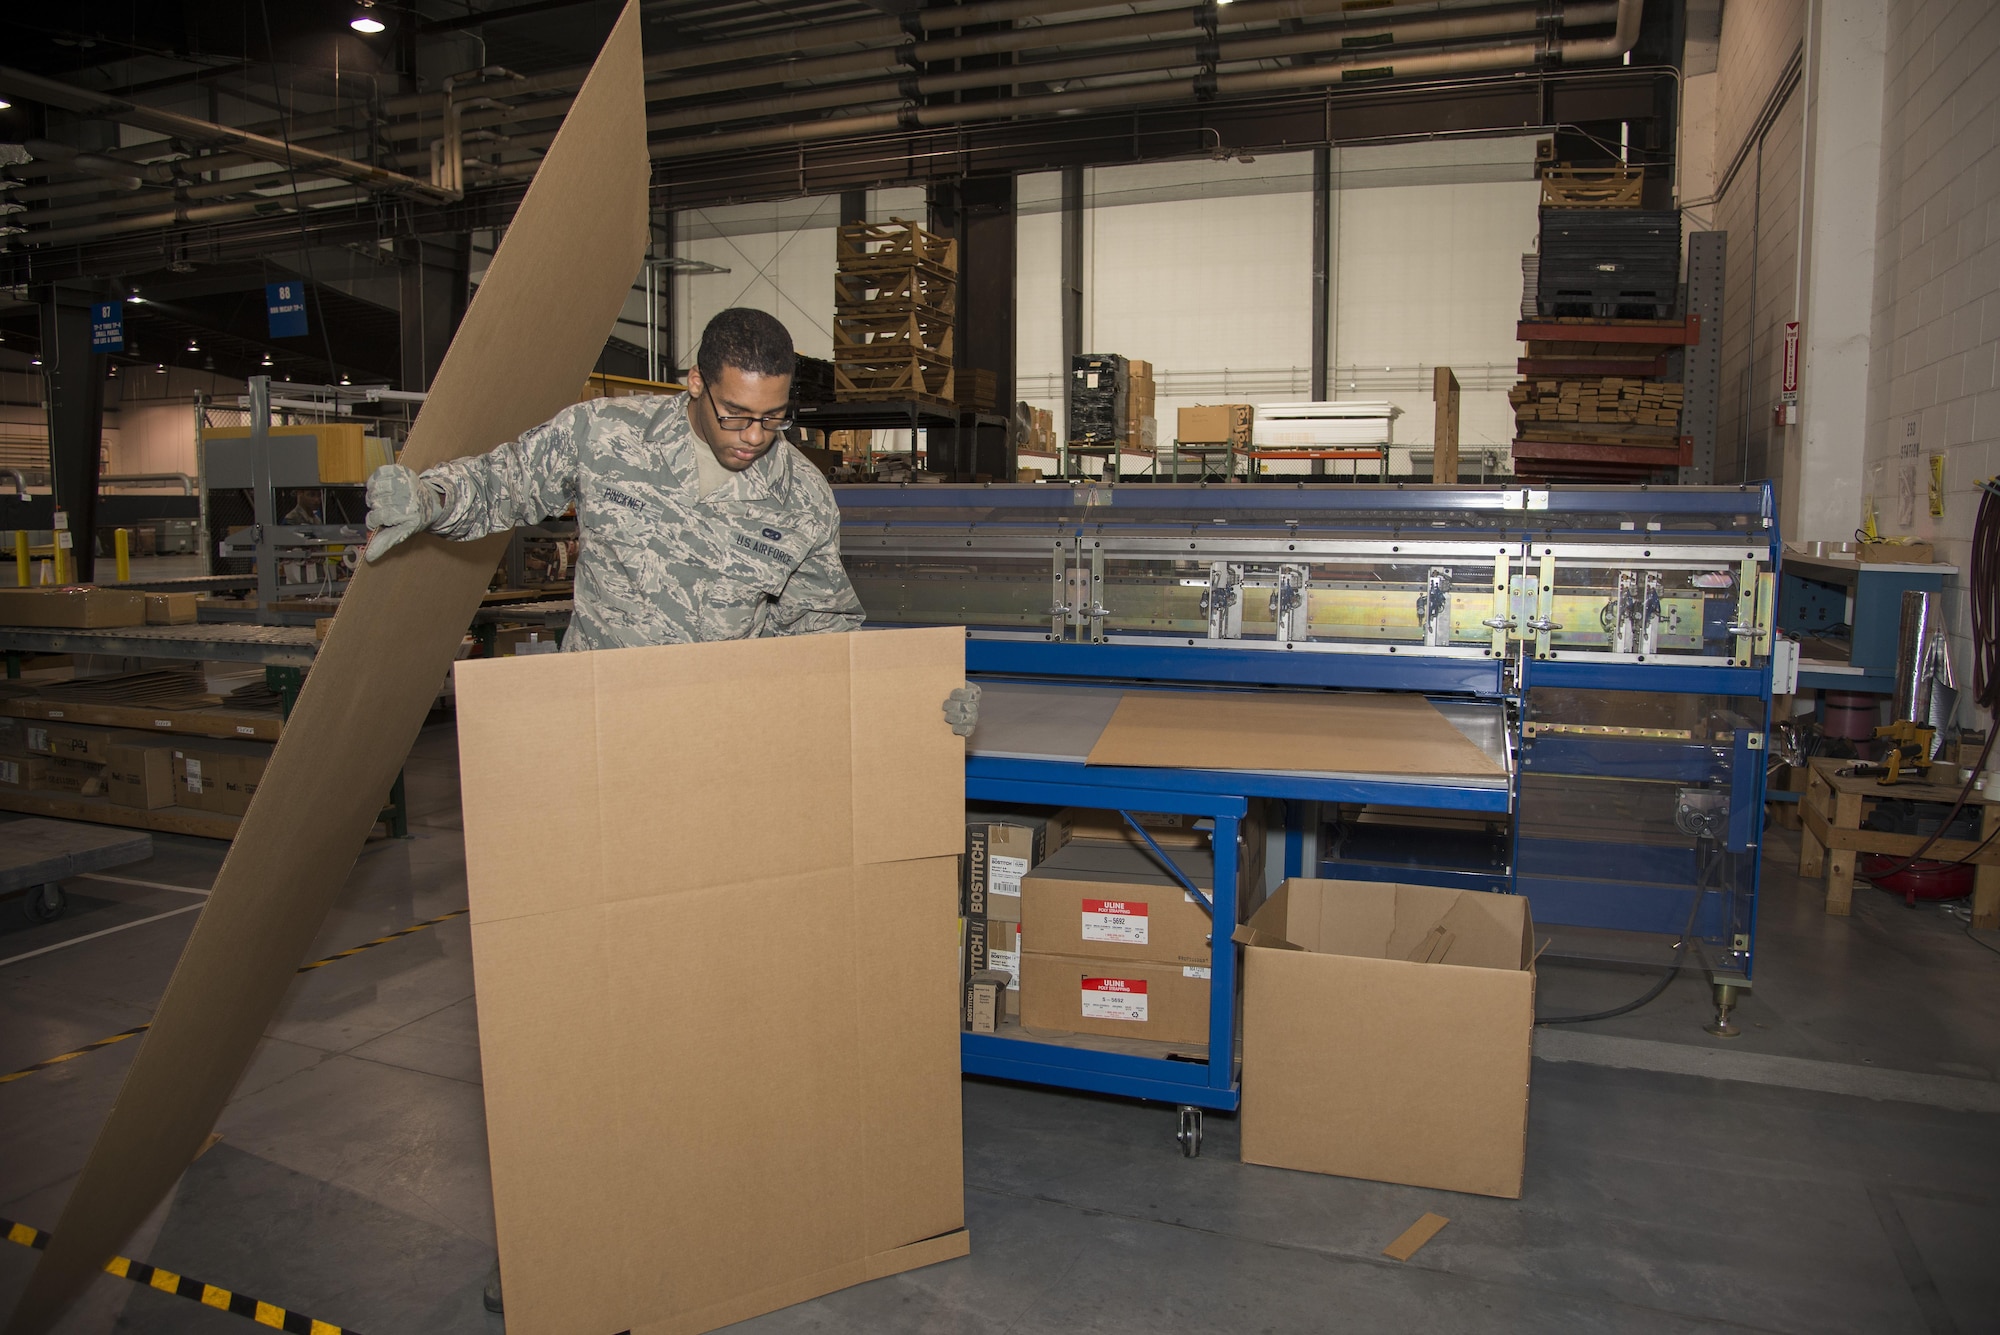 Senior Airman Gerard Pinckney, 436th Aerial Port Squadron traffic management specialist, picks up a piece of cardboard ready to be installed into a box Jan. 12, 2017, at the aerial port on Dover Air Force Base, Del. Making boxes as needed reduces the amount of storage space required, limits the amount of materials that need to be stored and reduces material waste. (U.S. Air Force photo by Senior Airman Aaron J. Jenne)